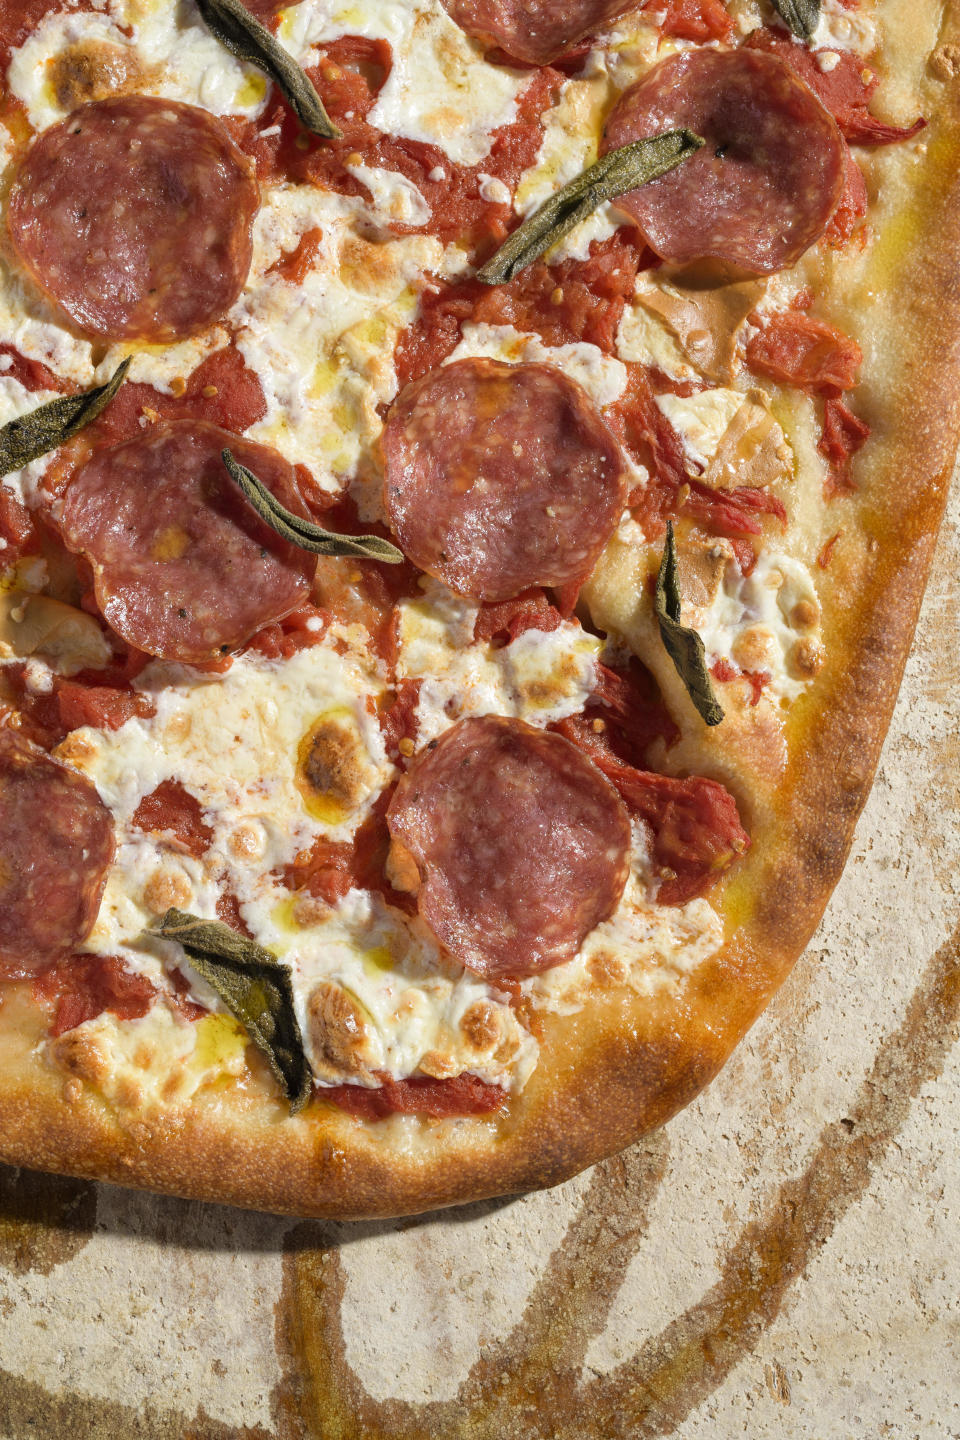 This image released by Milk Street shows a recipe for pizza with salami and smoked mozzarella. (Milk Street via AP)